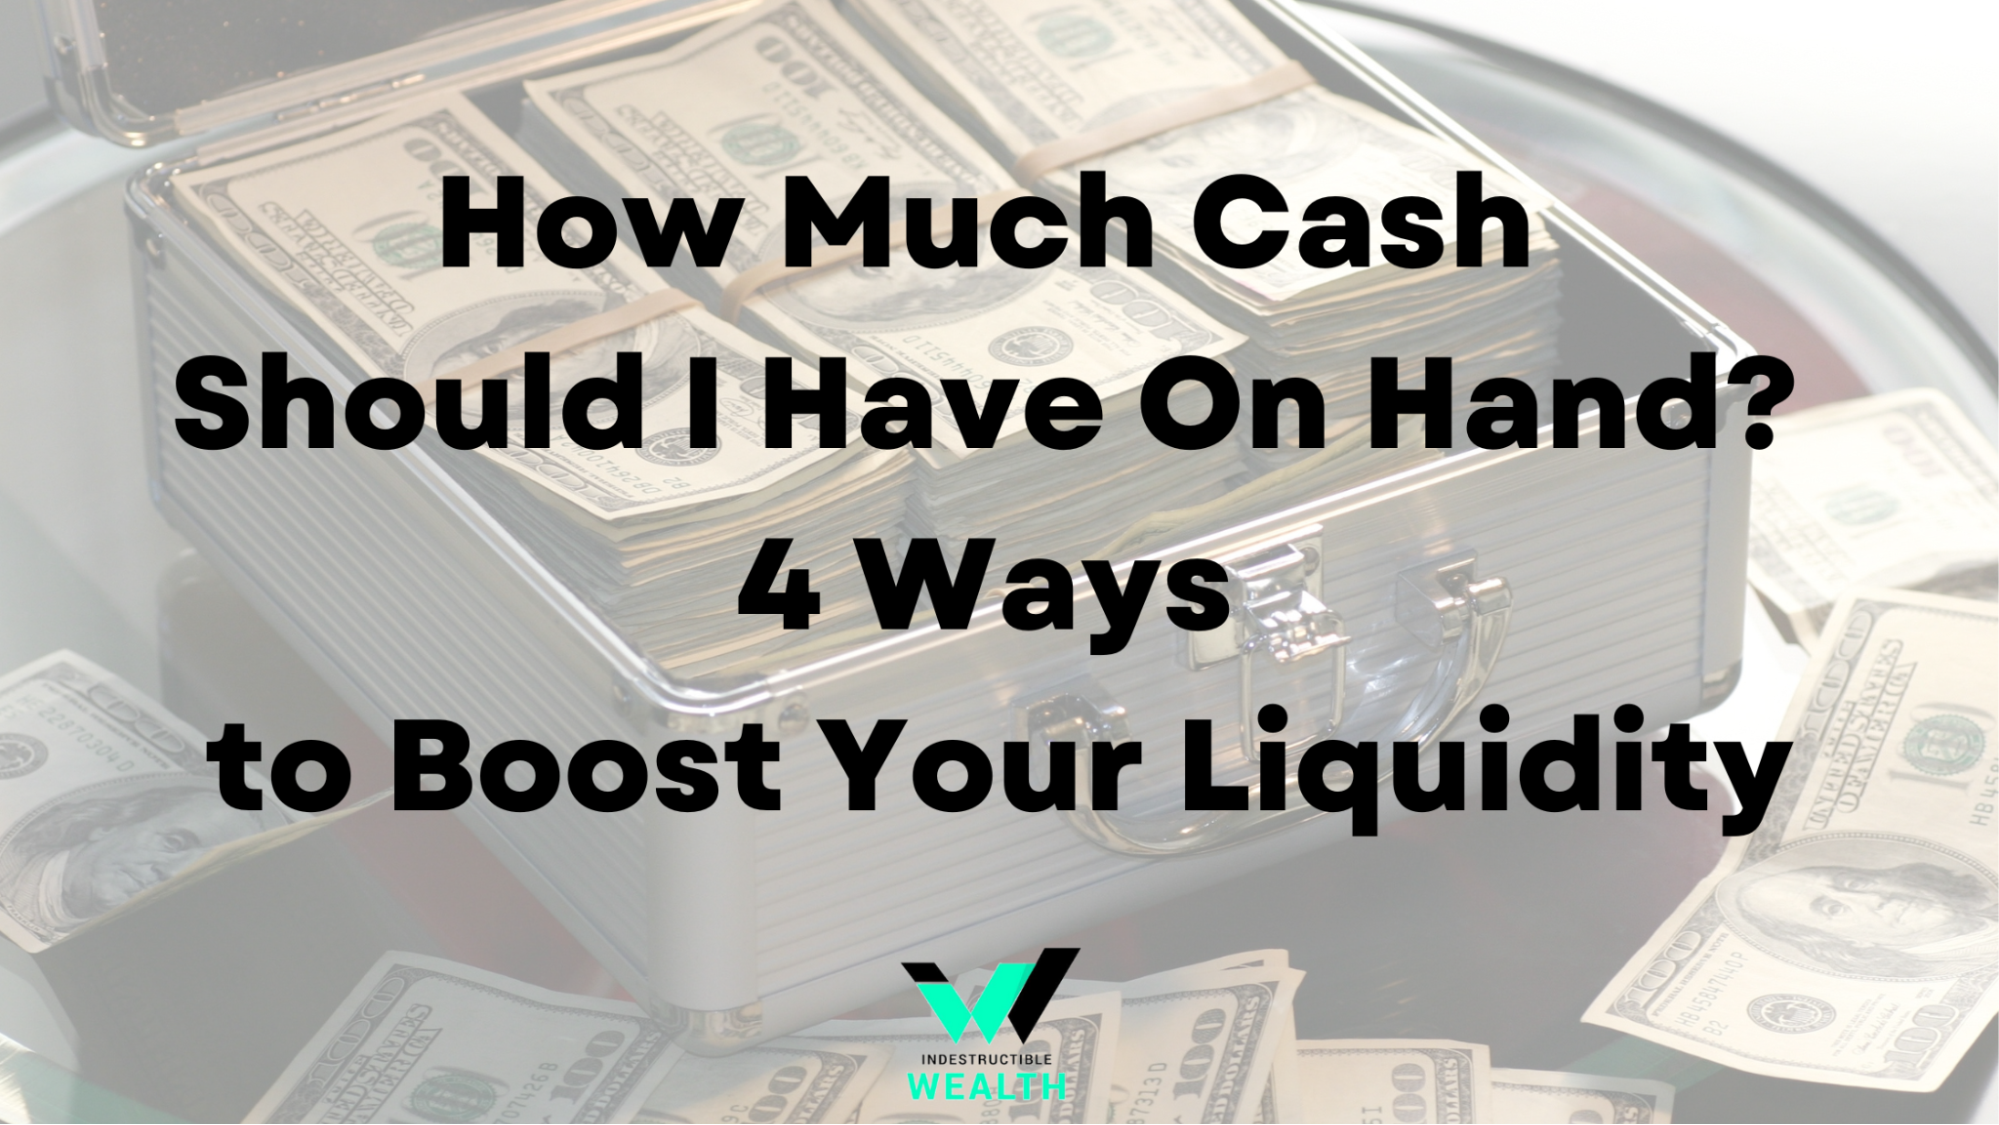 How Much Cash Should I Have On Hand? 4 Ways to Boost Your Liquidity